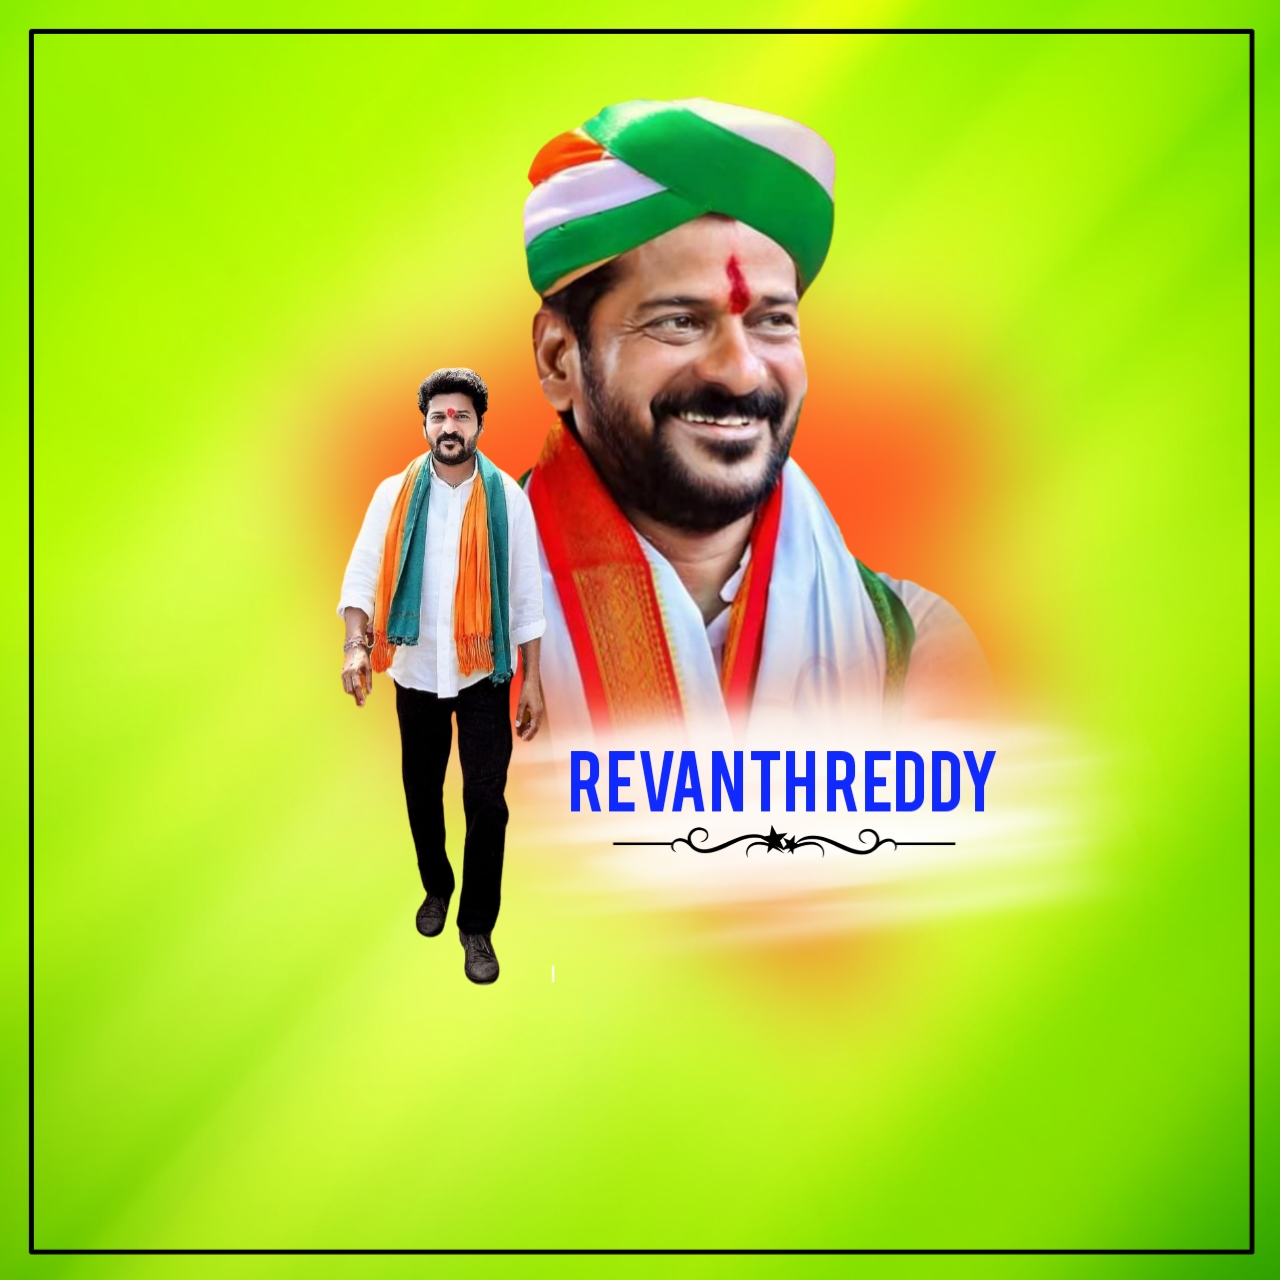 Revanth Reddy Free Pixellab Banners || Free Revanth Reddy Pixellab Hd Banner  Files || Free Telangana Congress Banners In Mobile